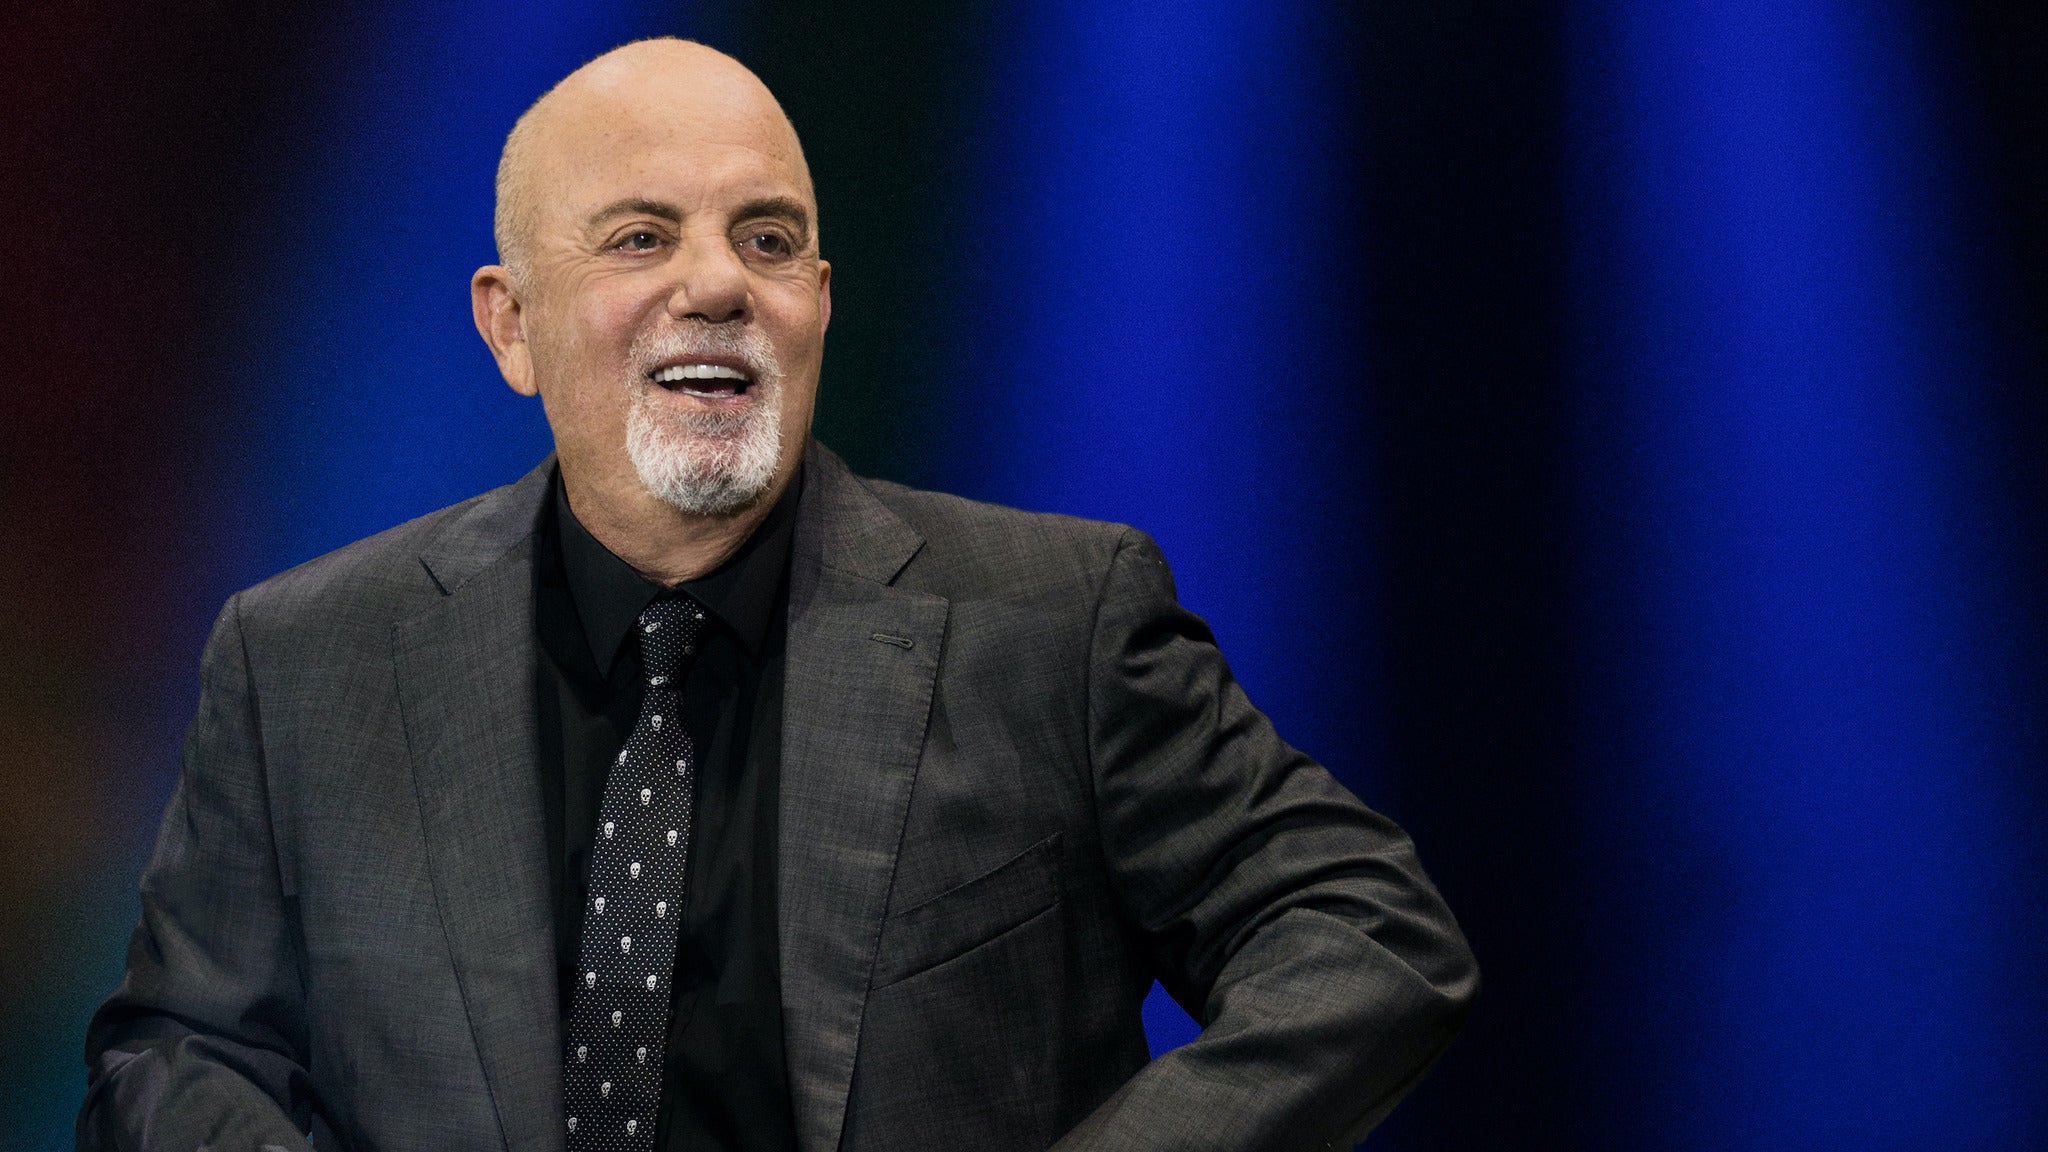 Billy Joel - In Concert presale password for early tickets in New York